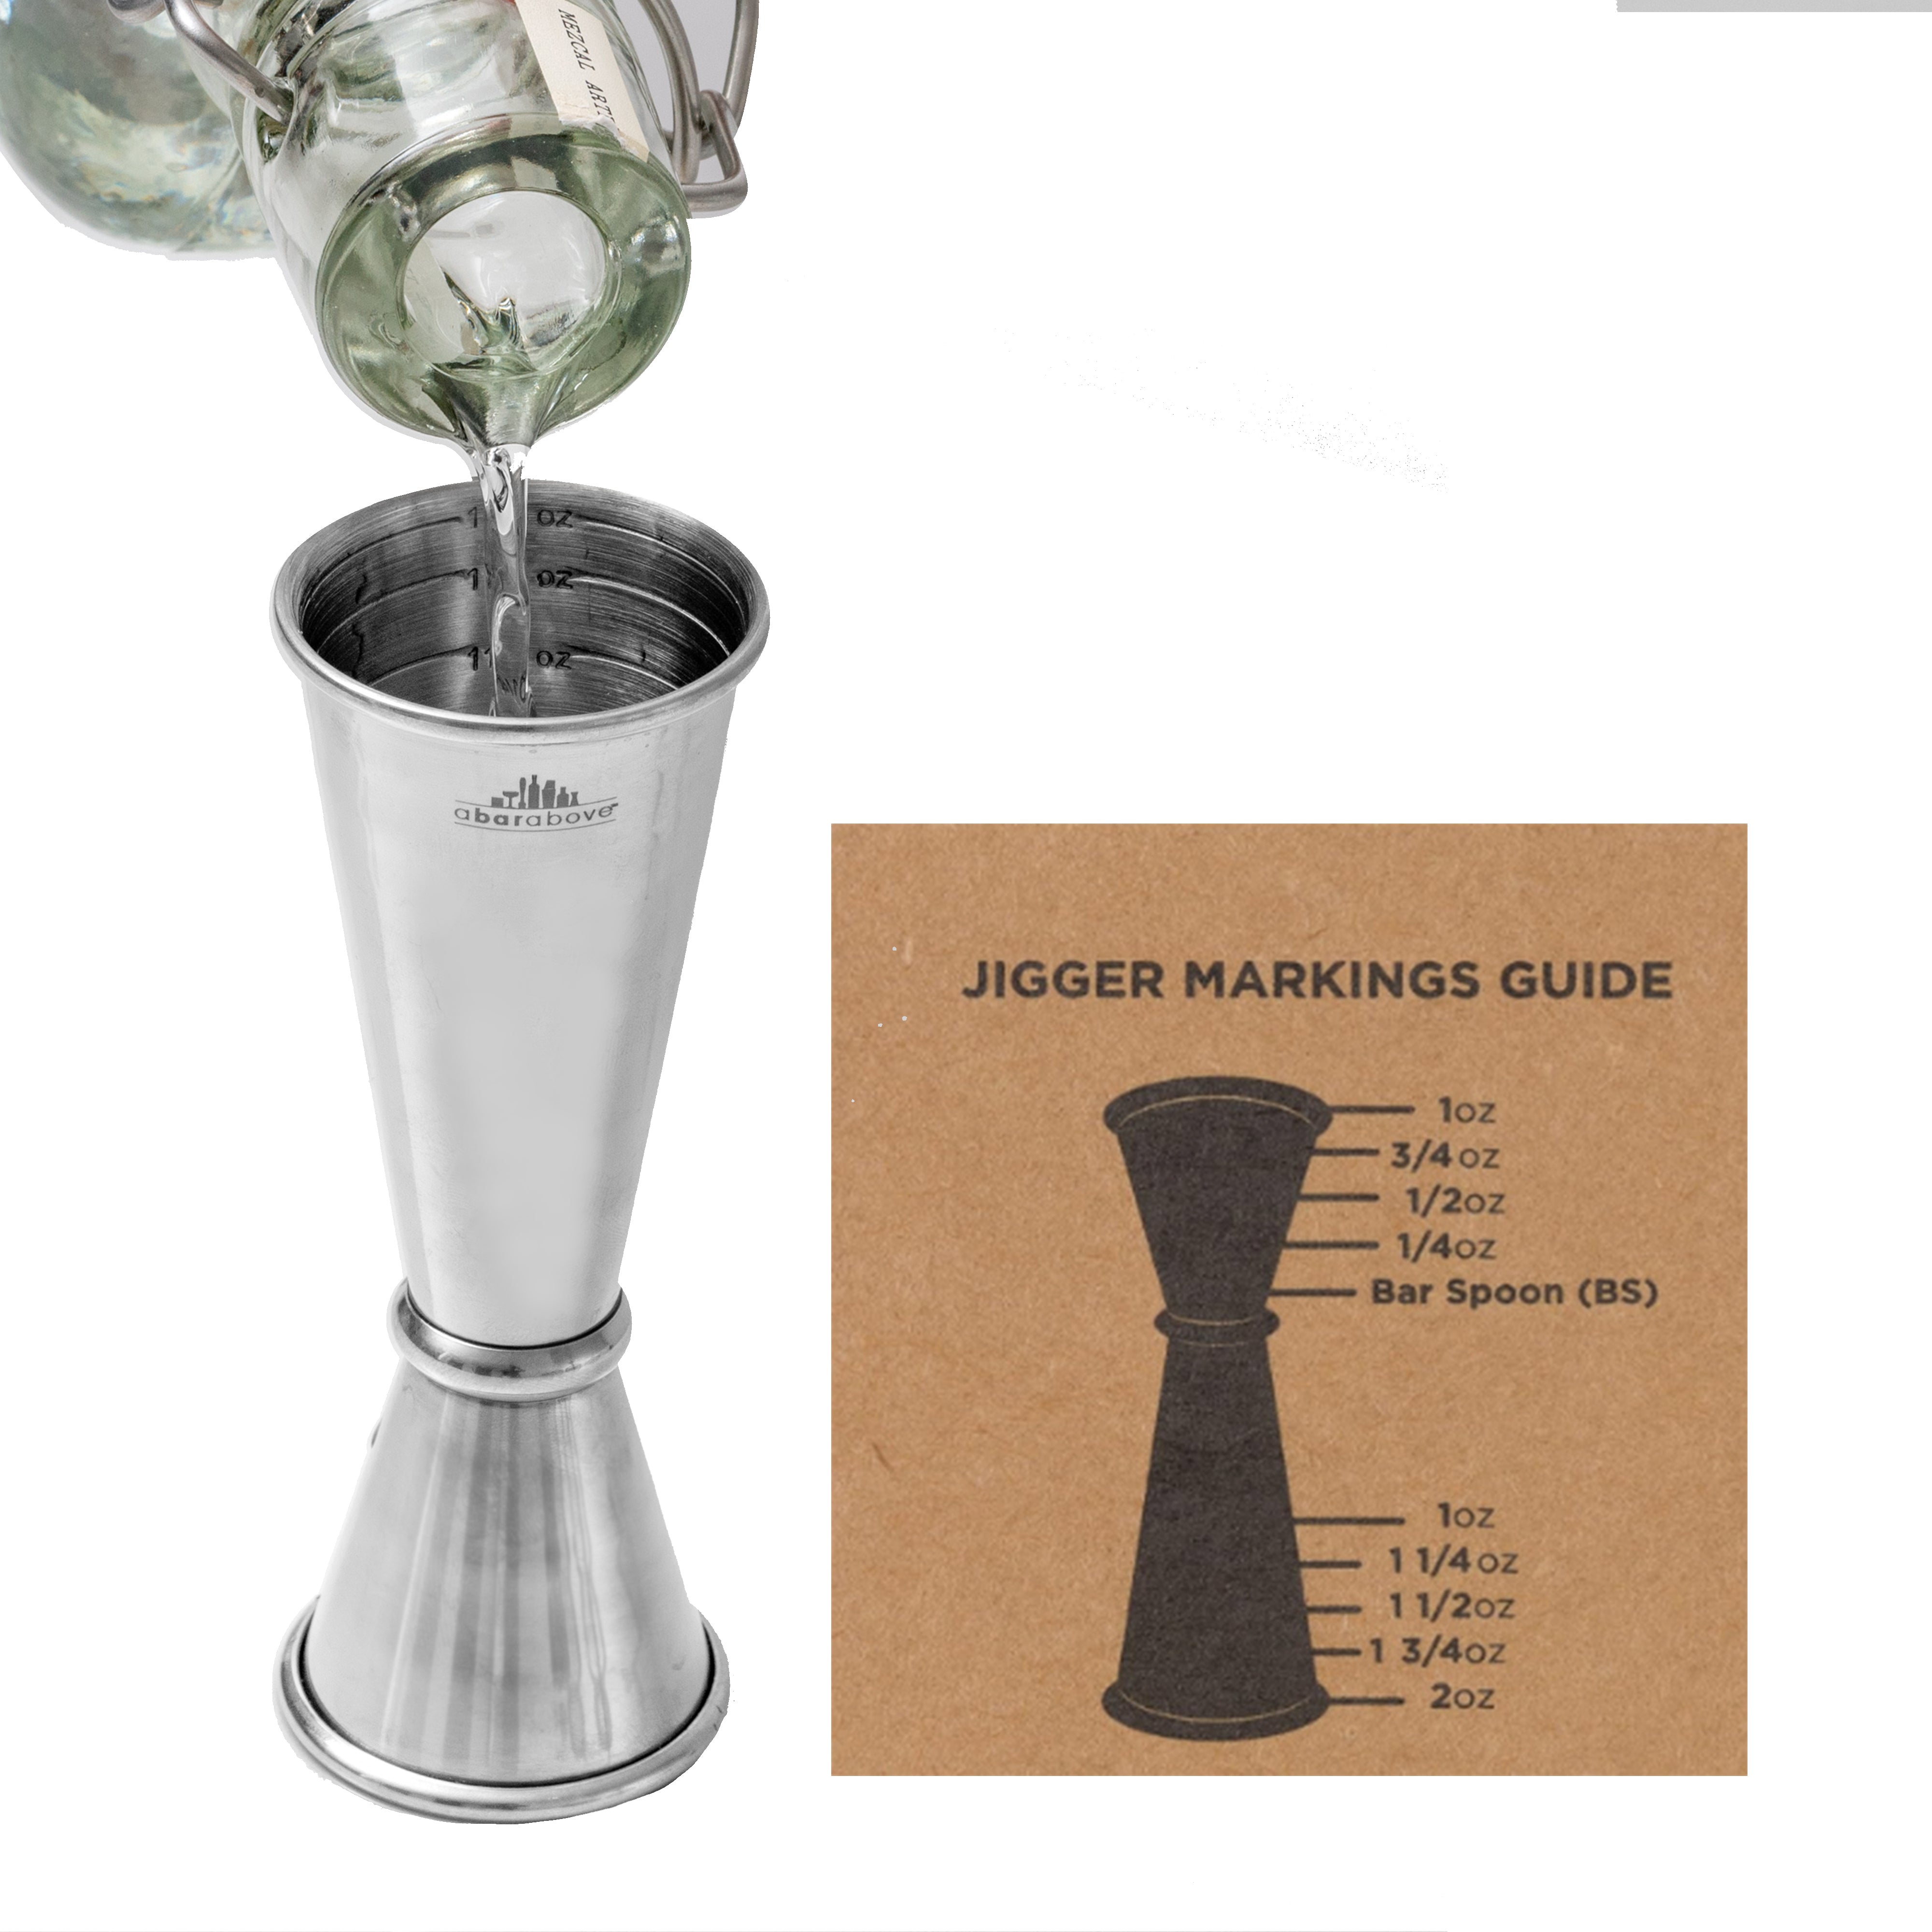 How To Use a Jigger for Good Measure